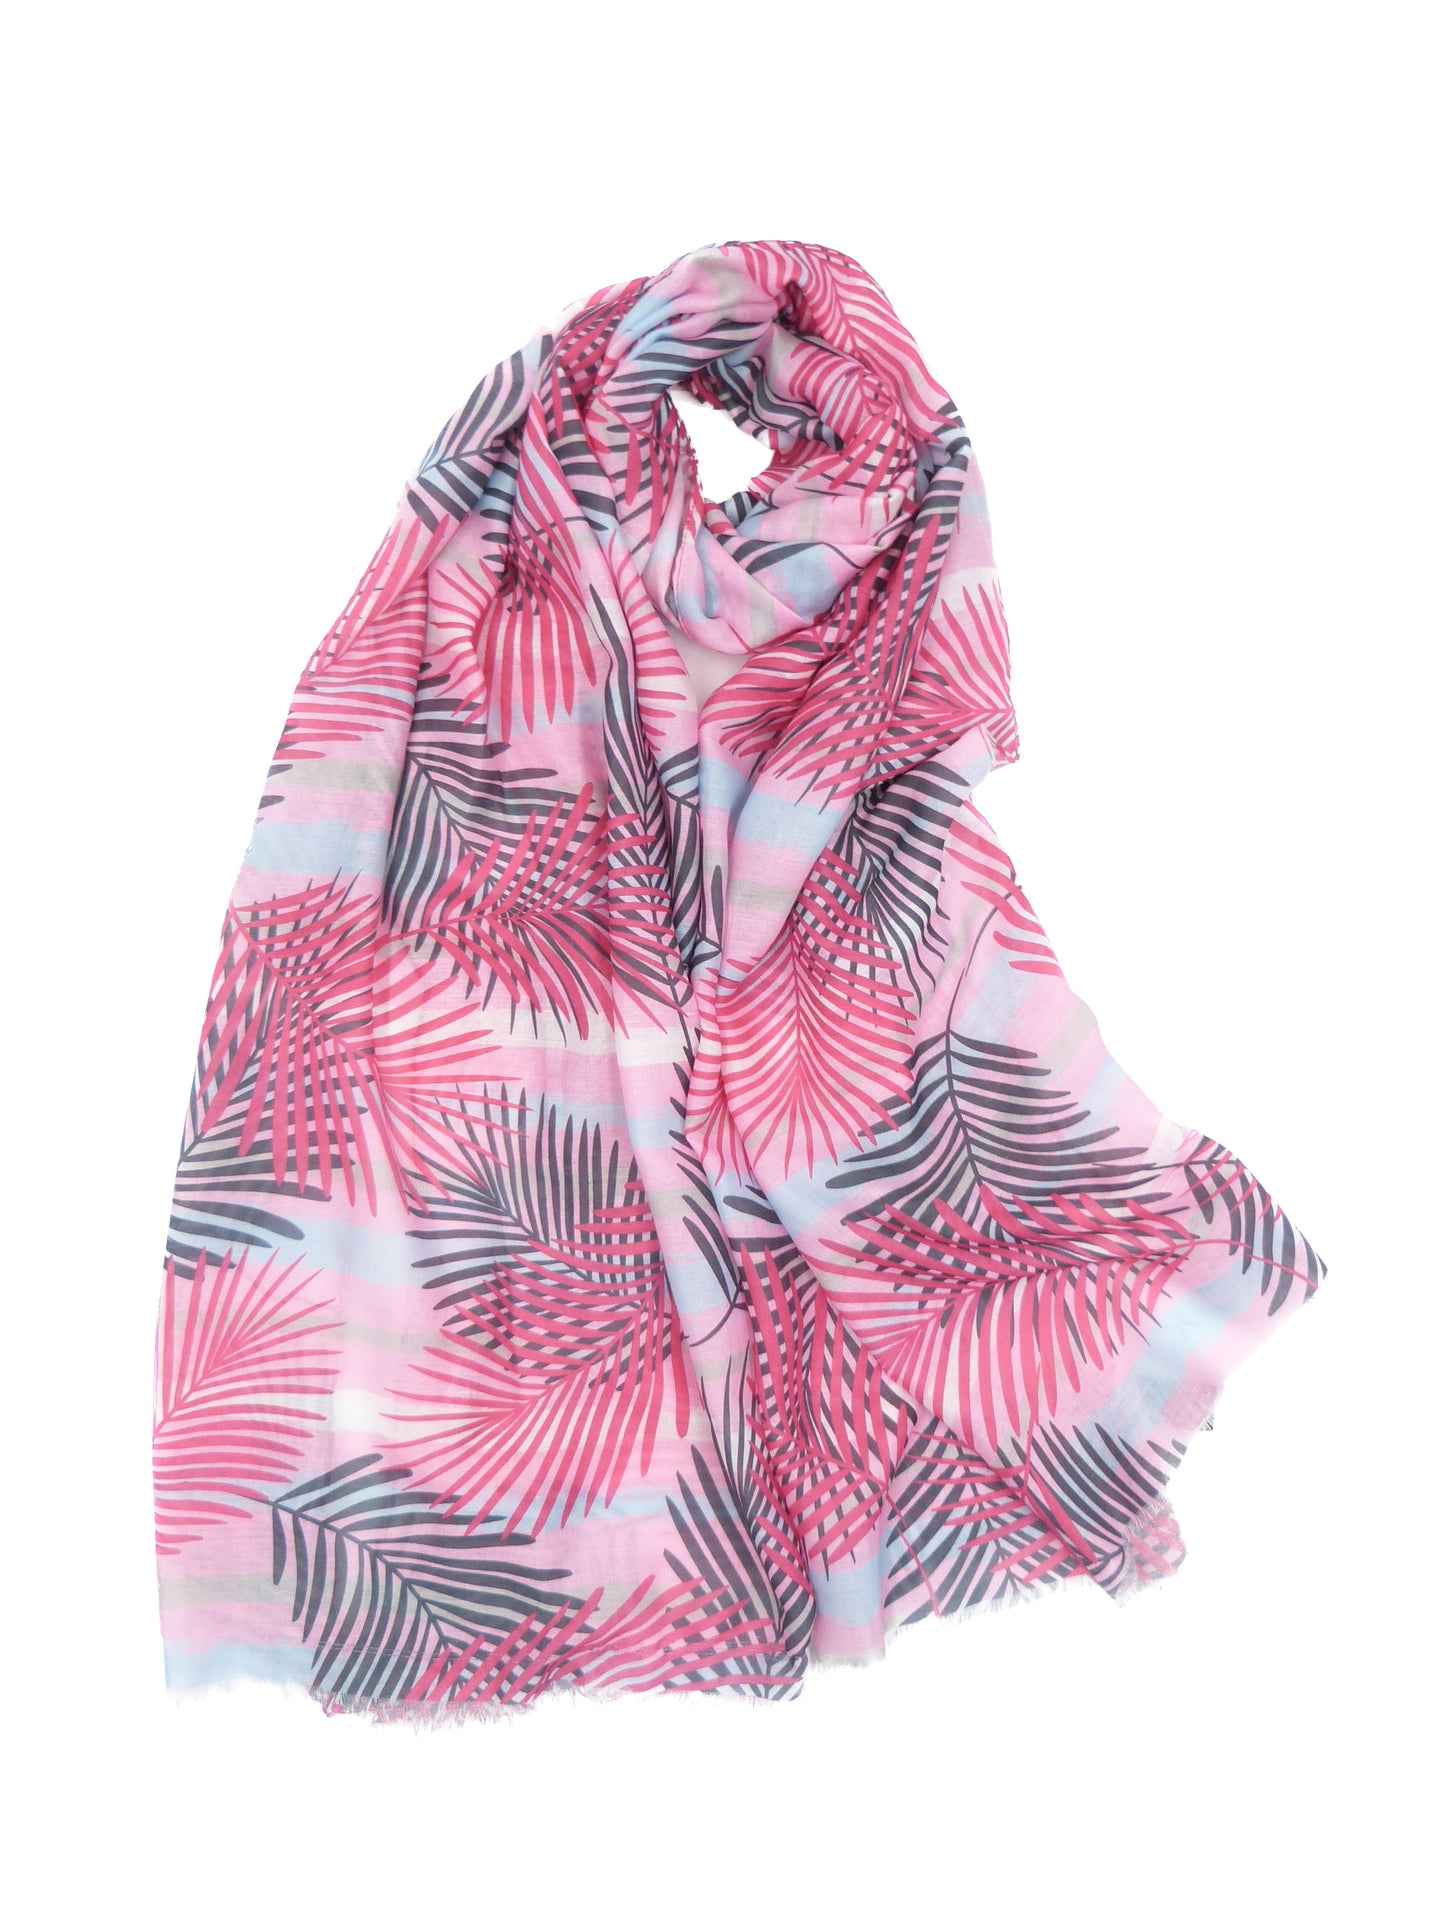 Rainforest Tree Leaf Print Scarf Come With Gift Box